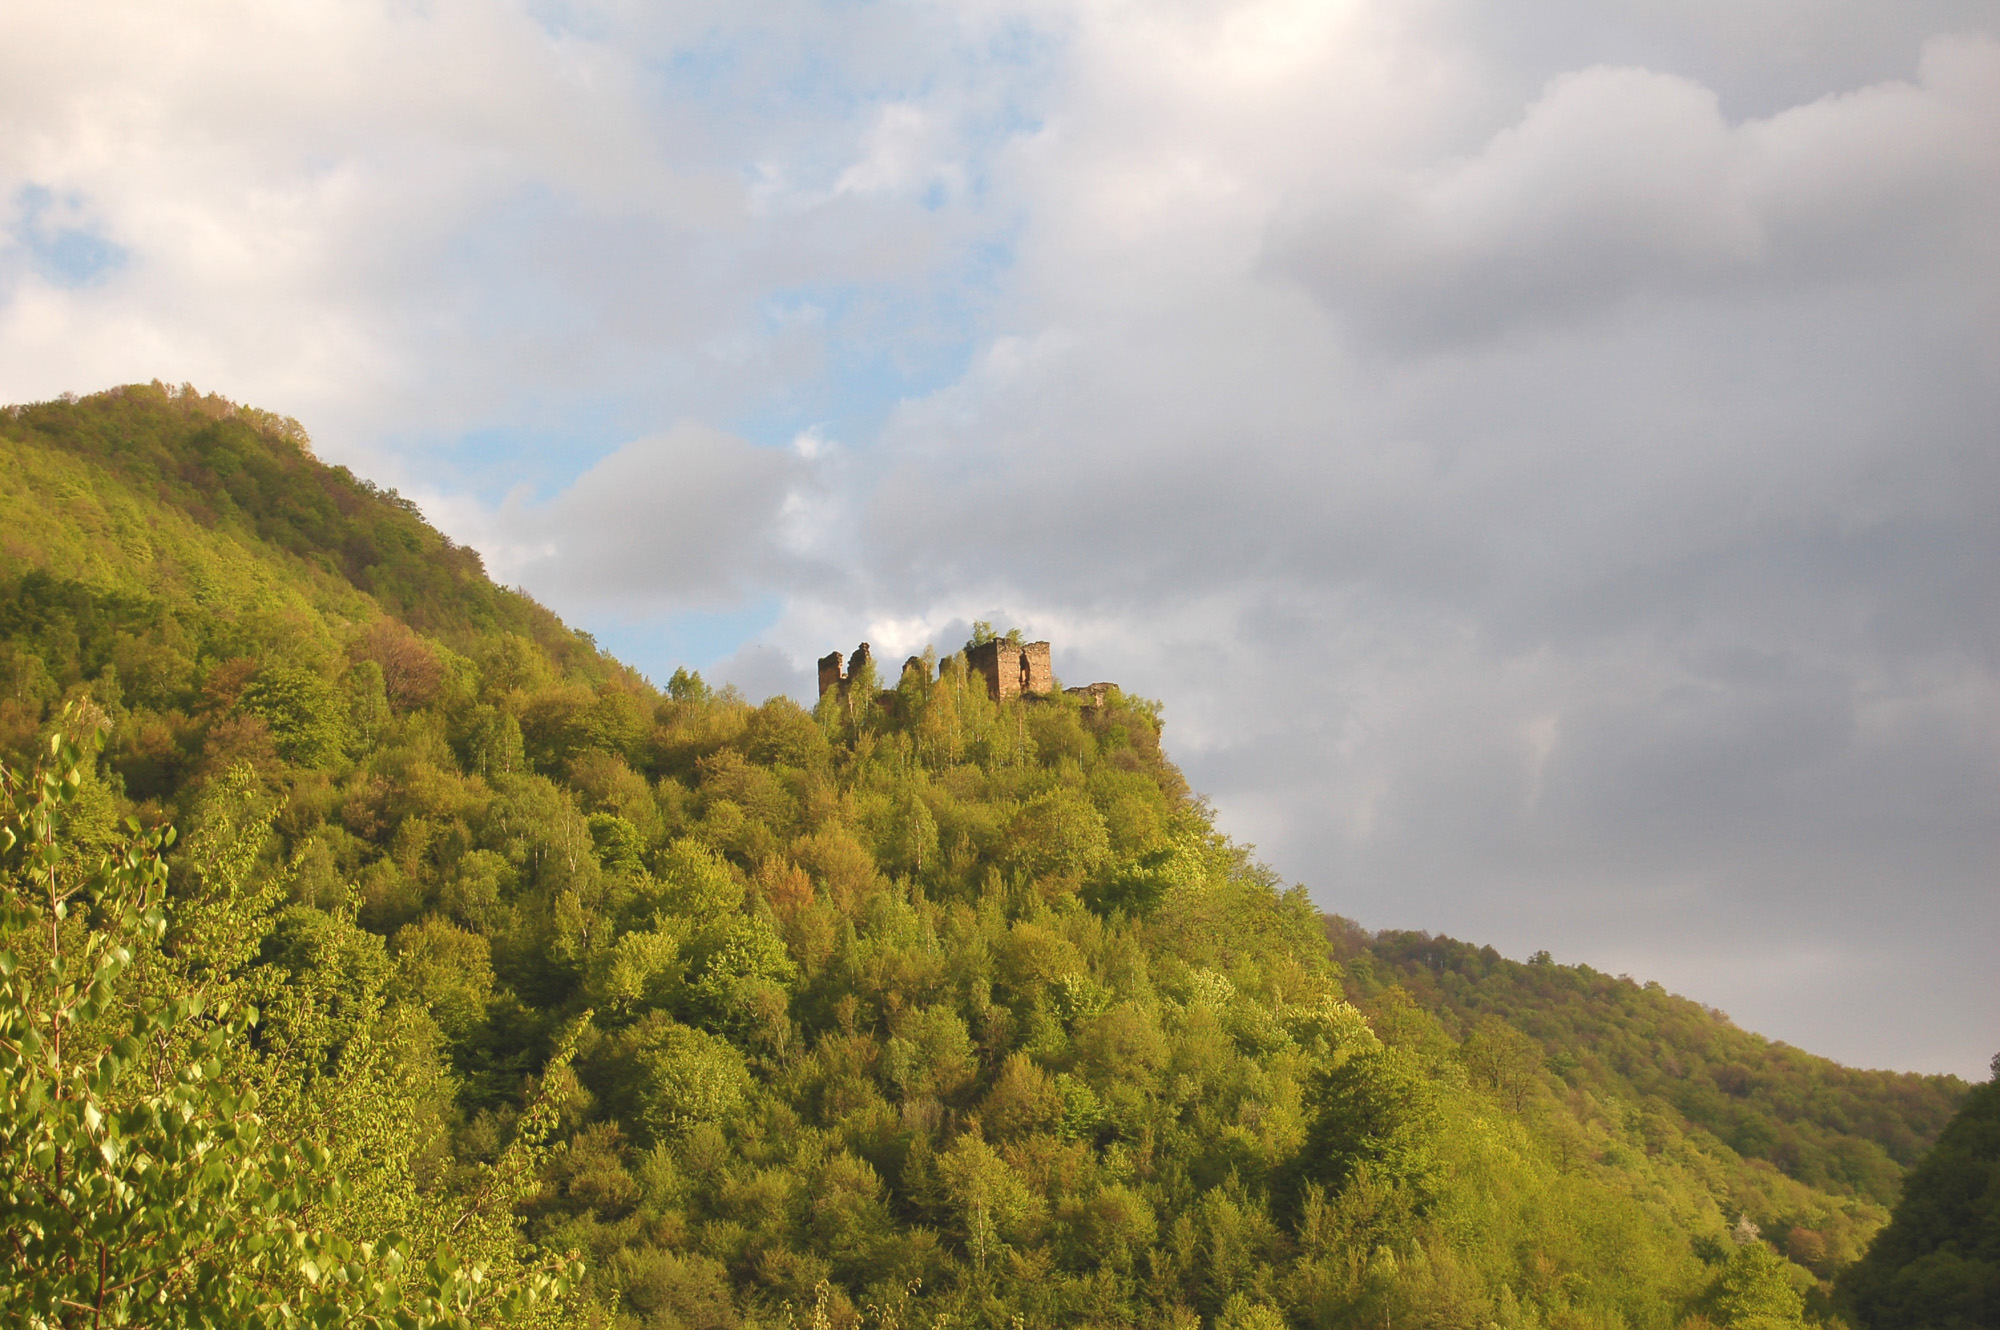 the fortress is situated on a hilltop 